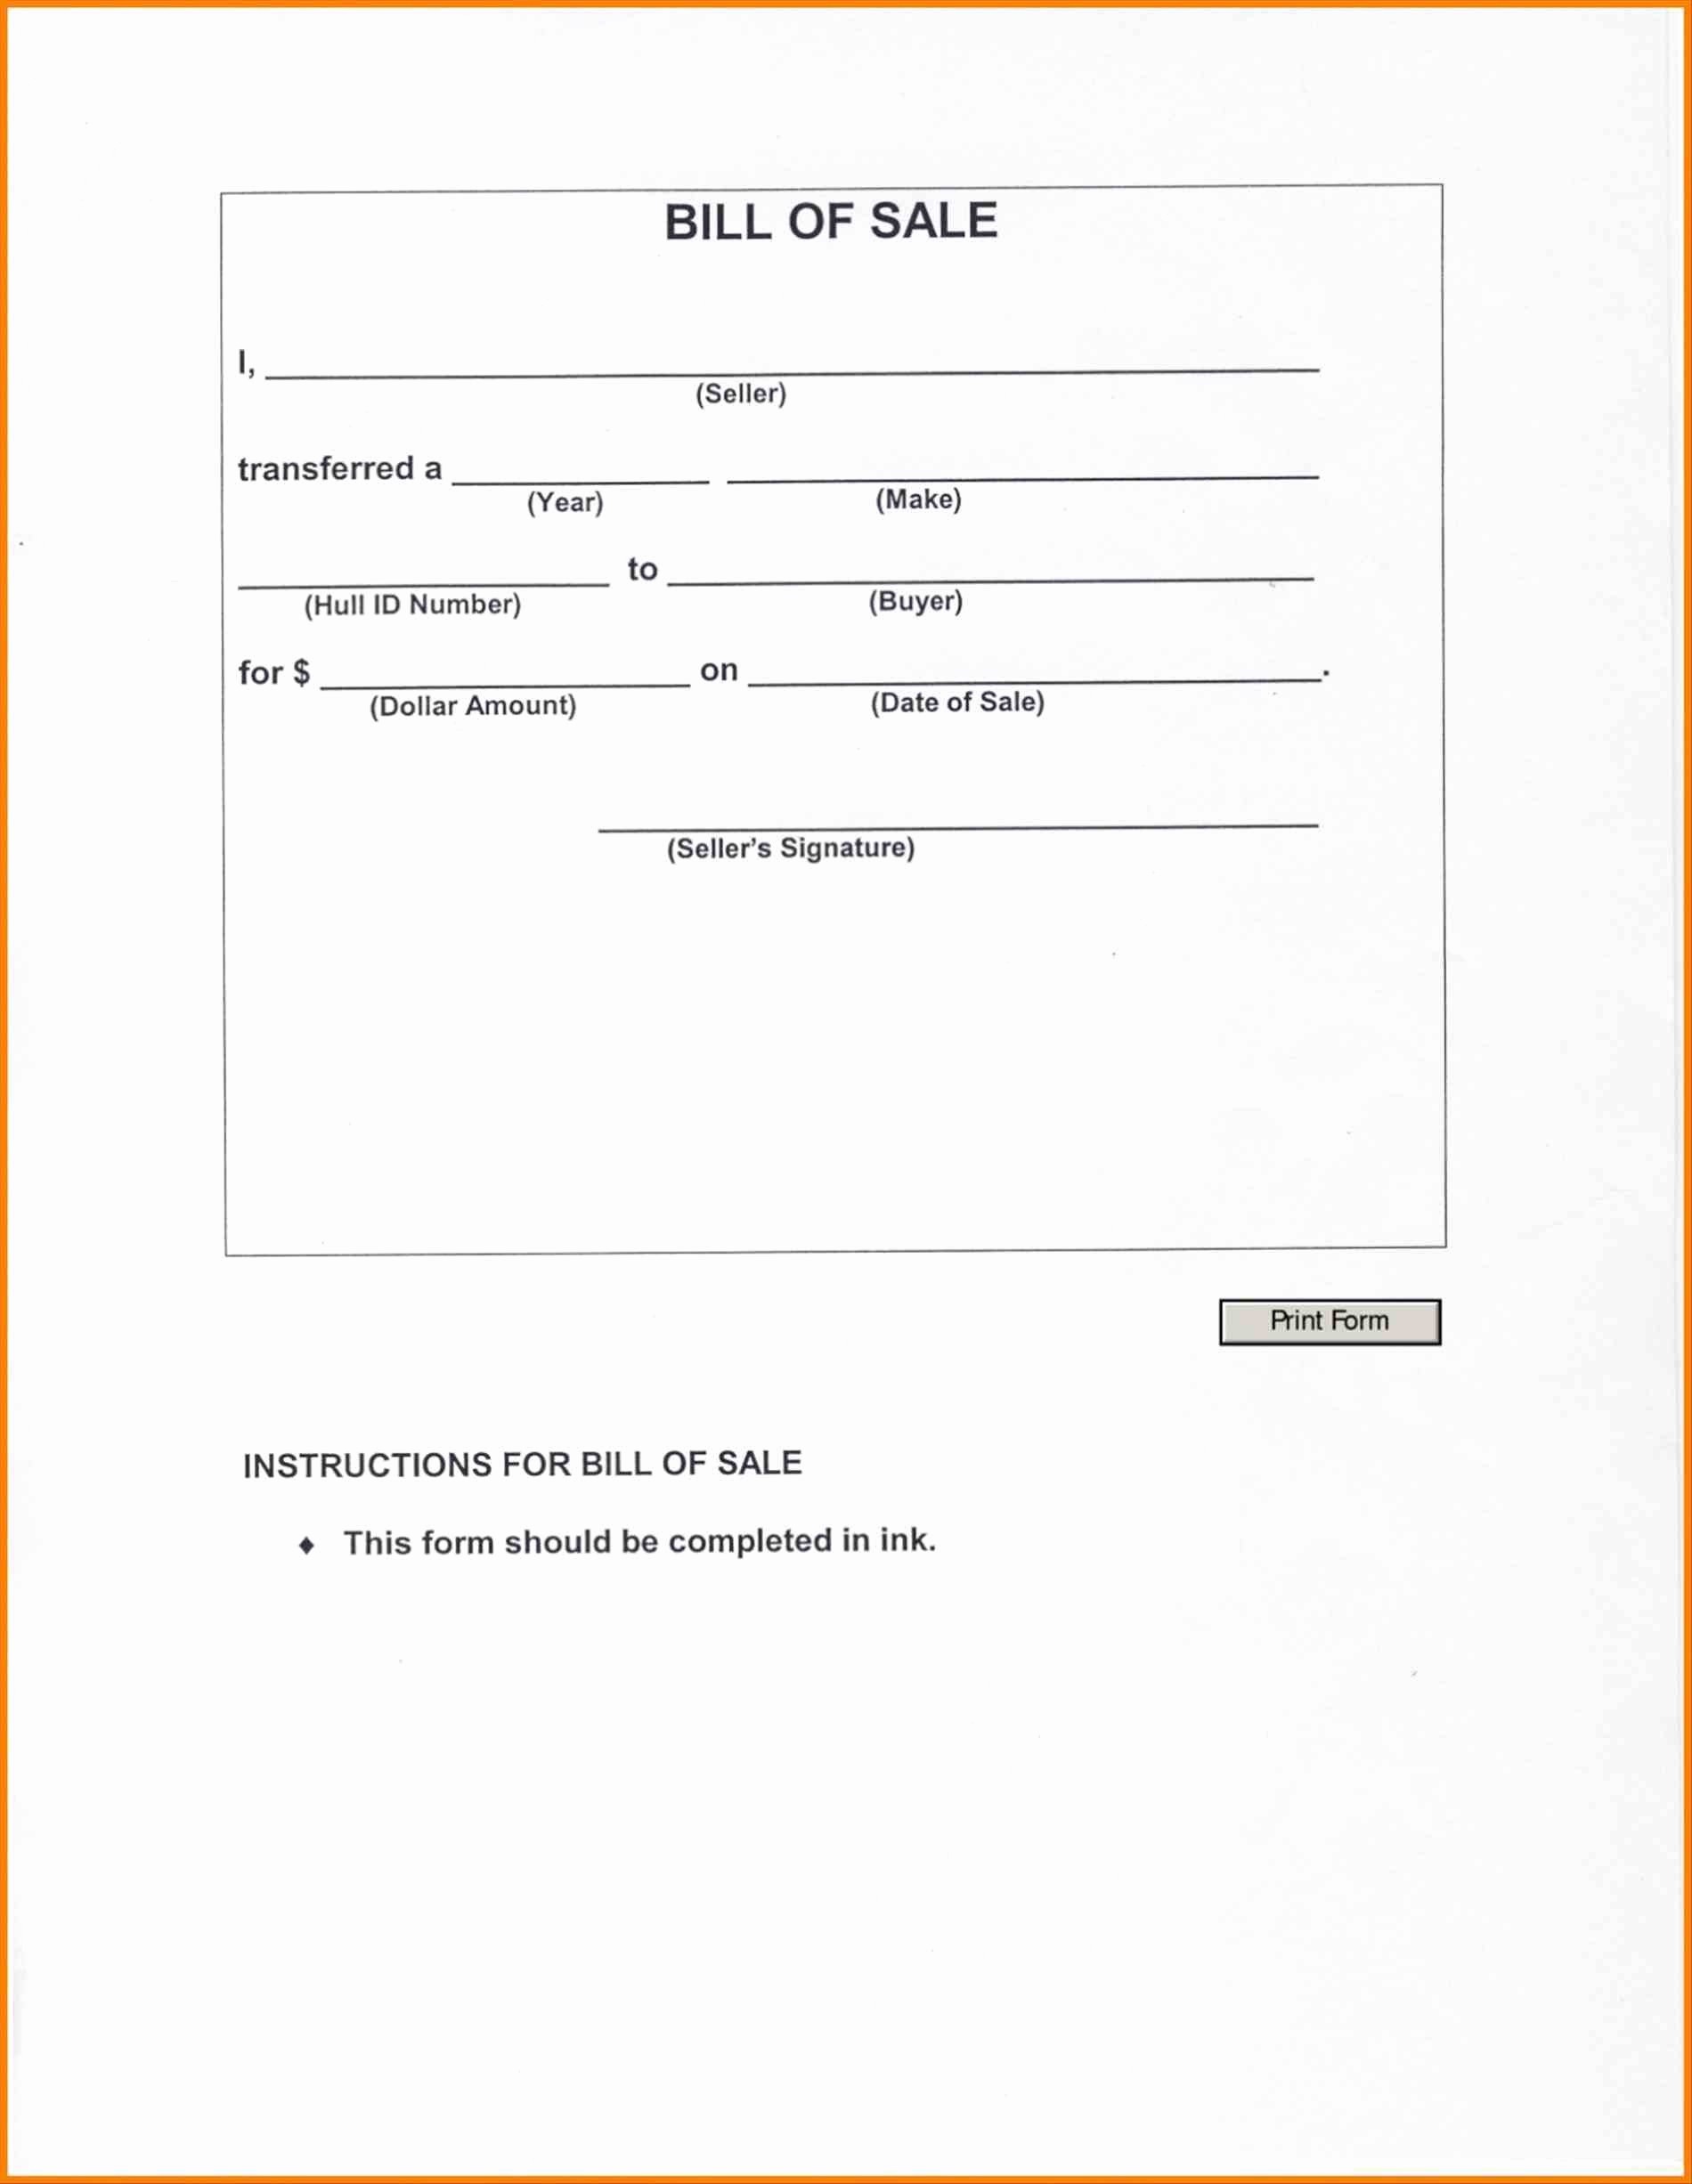 Basic Bill Of Sale Template Unique Rv Purchase Agreement Pdf Basic Printable Bill Sale